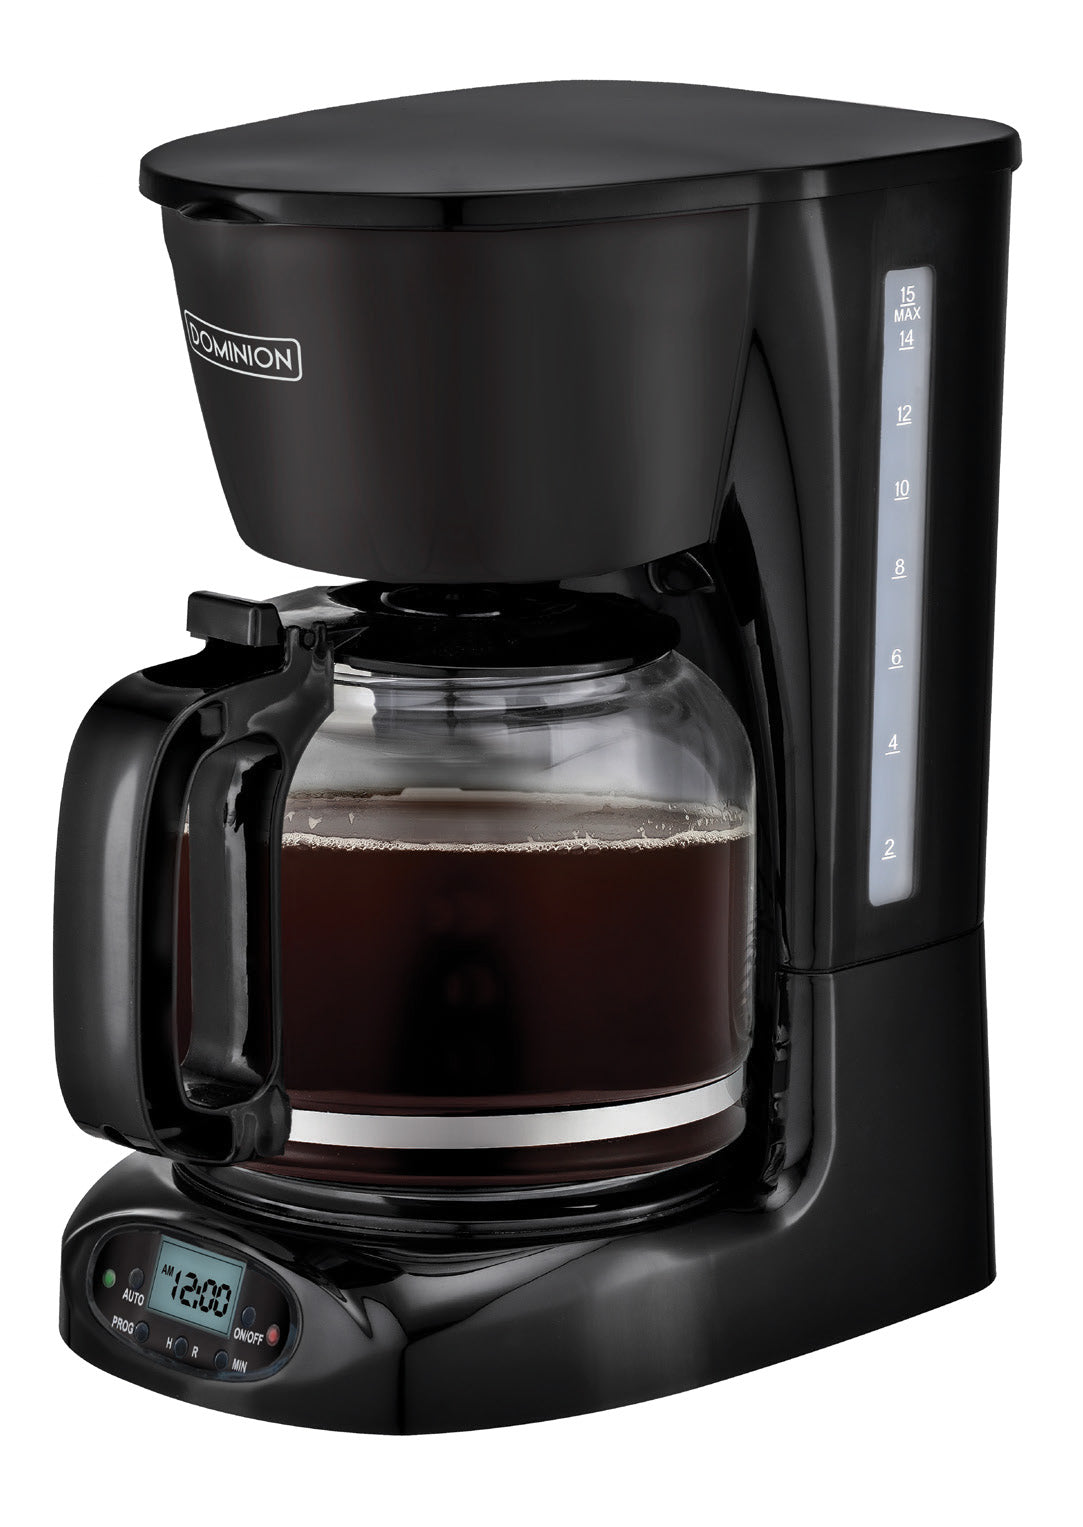 15 Cup Programmable Coffee Maker